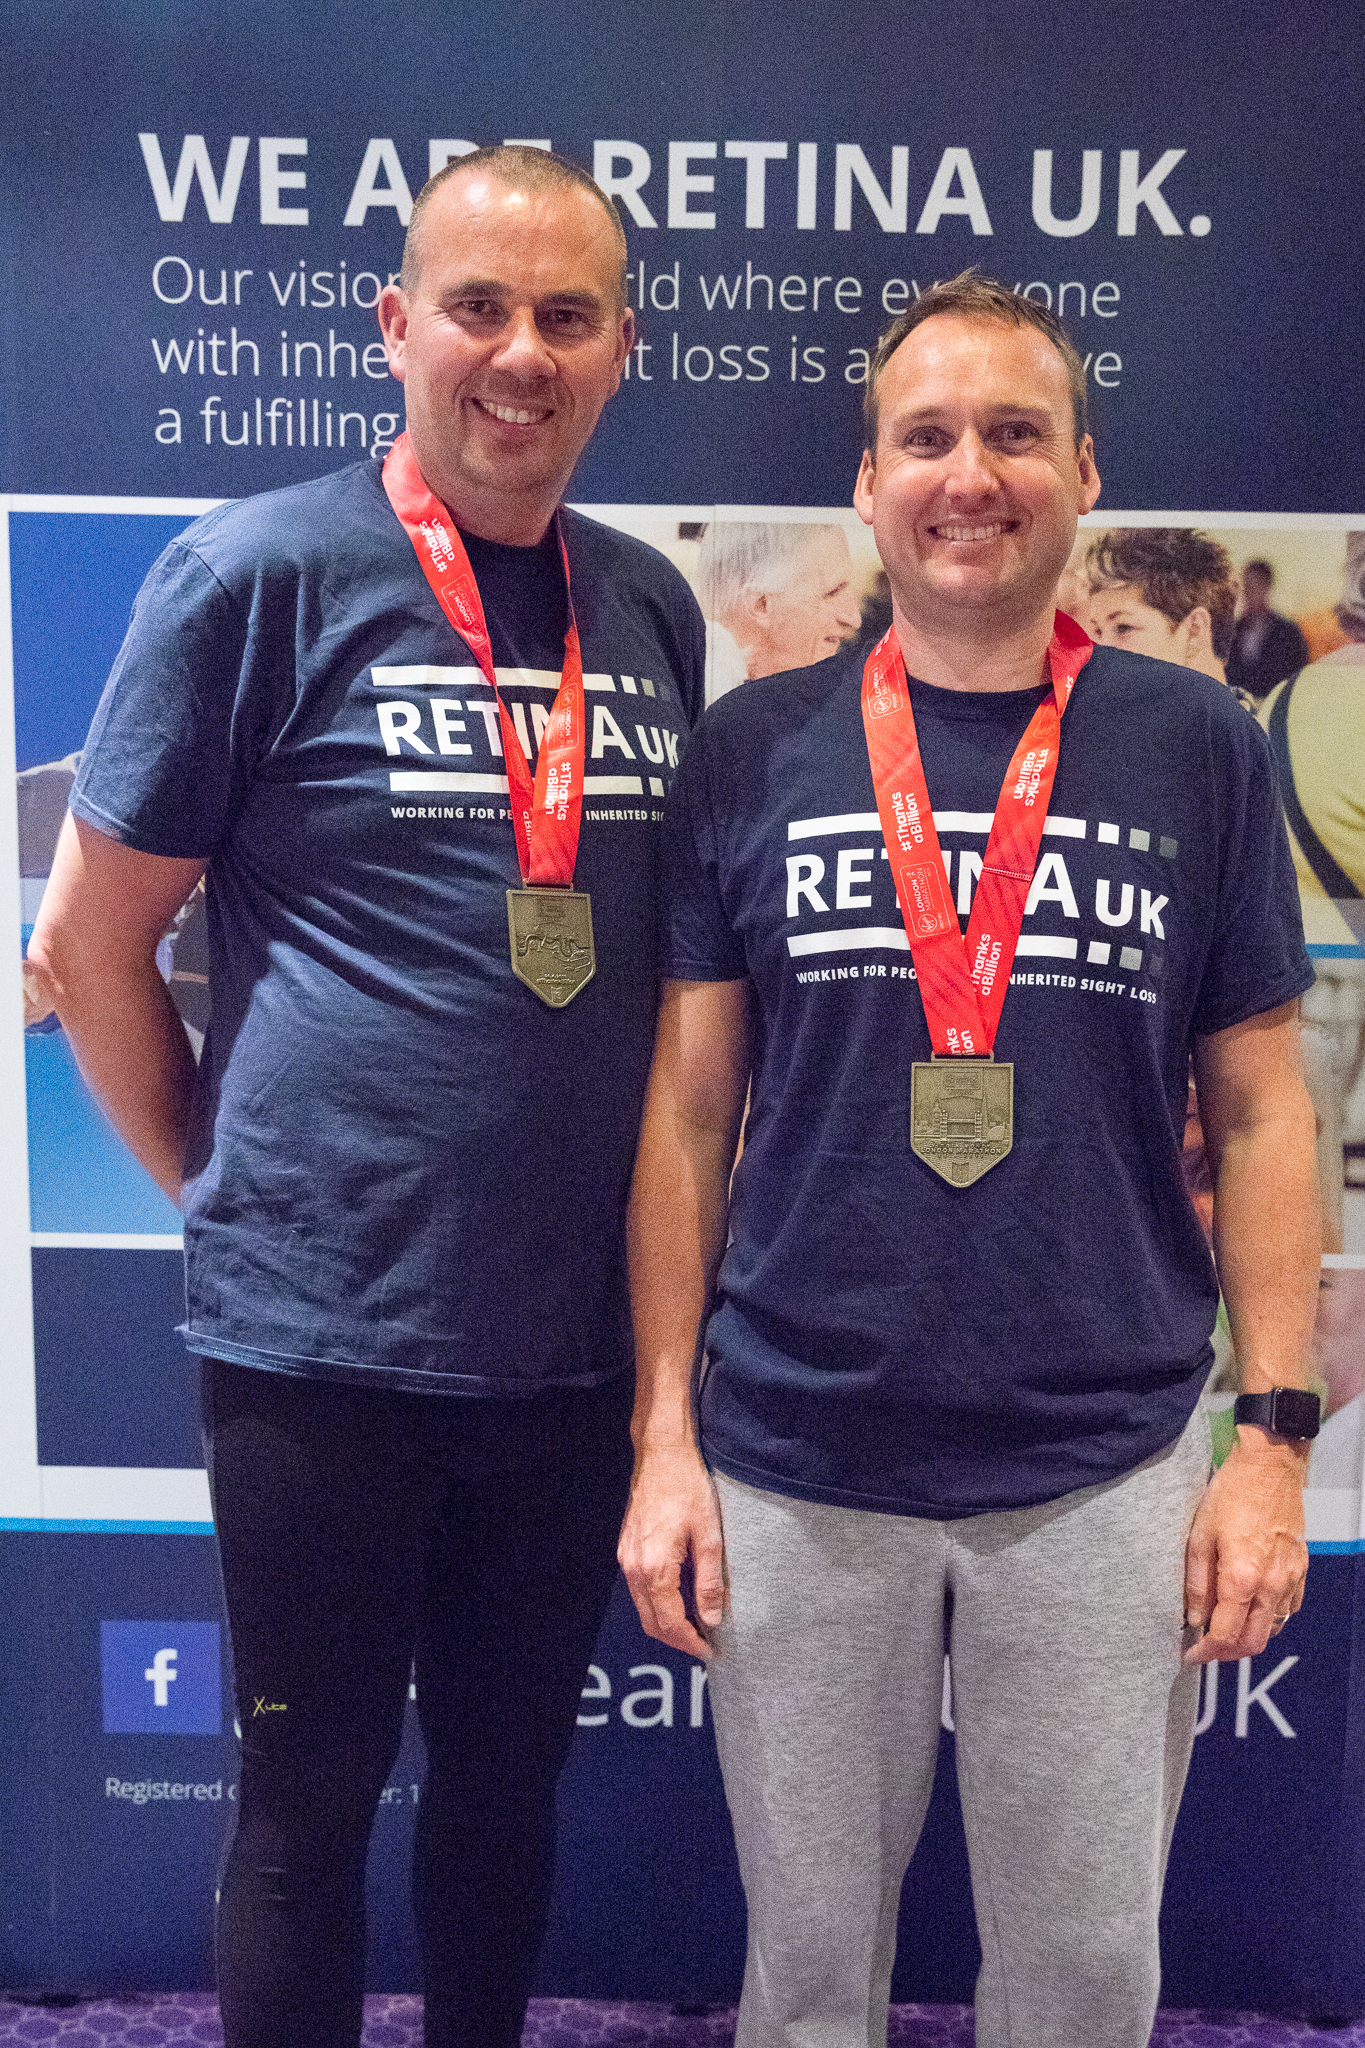 Ashley and his guide runner wearing Retina UK tshirts. They have medals hanging around their necks